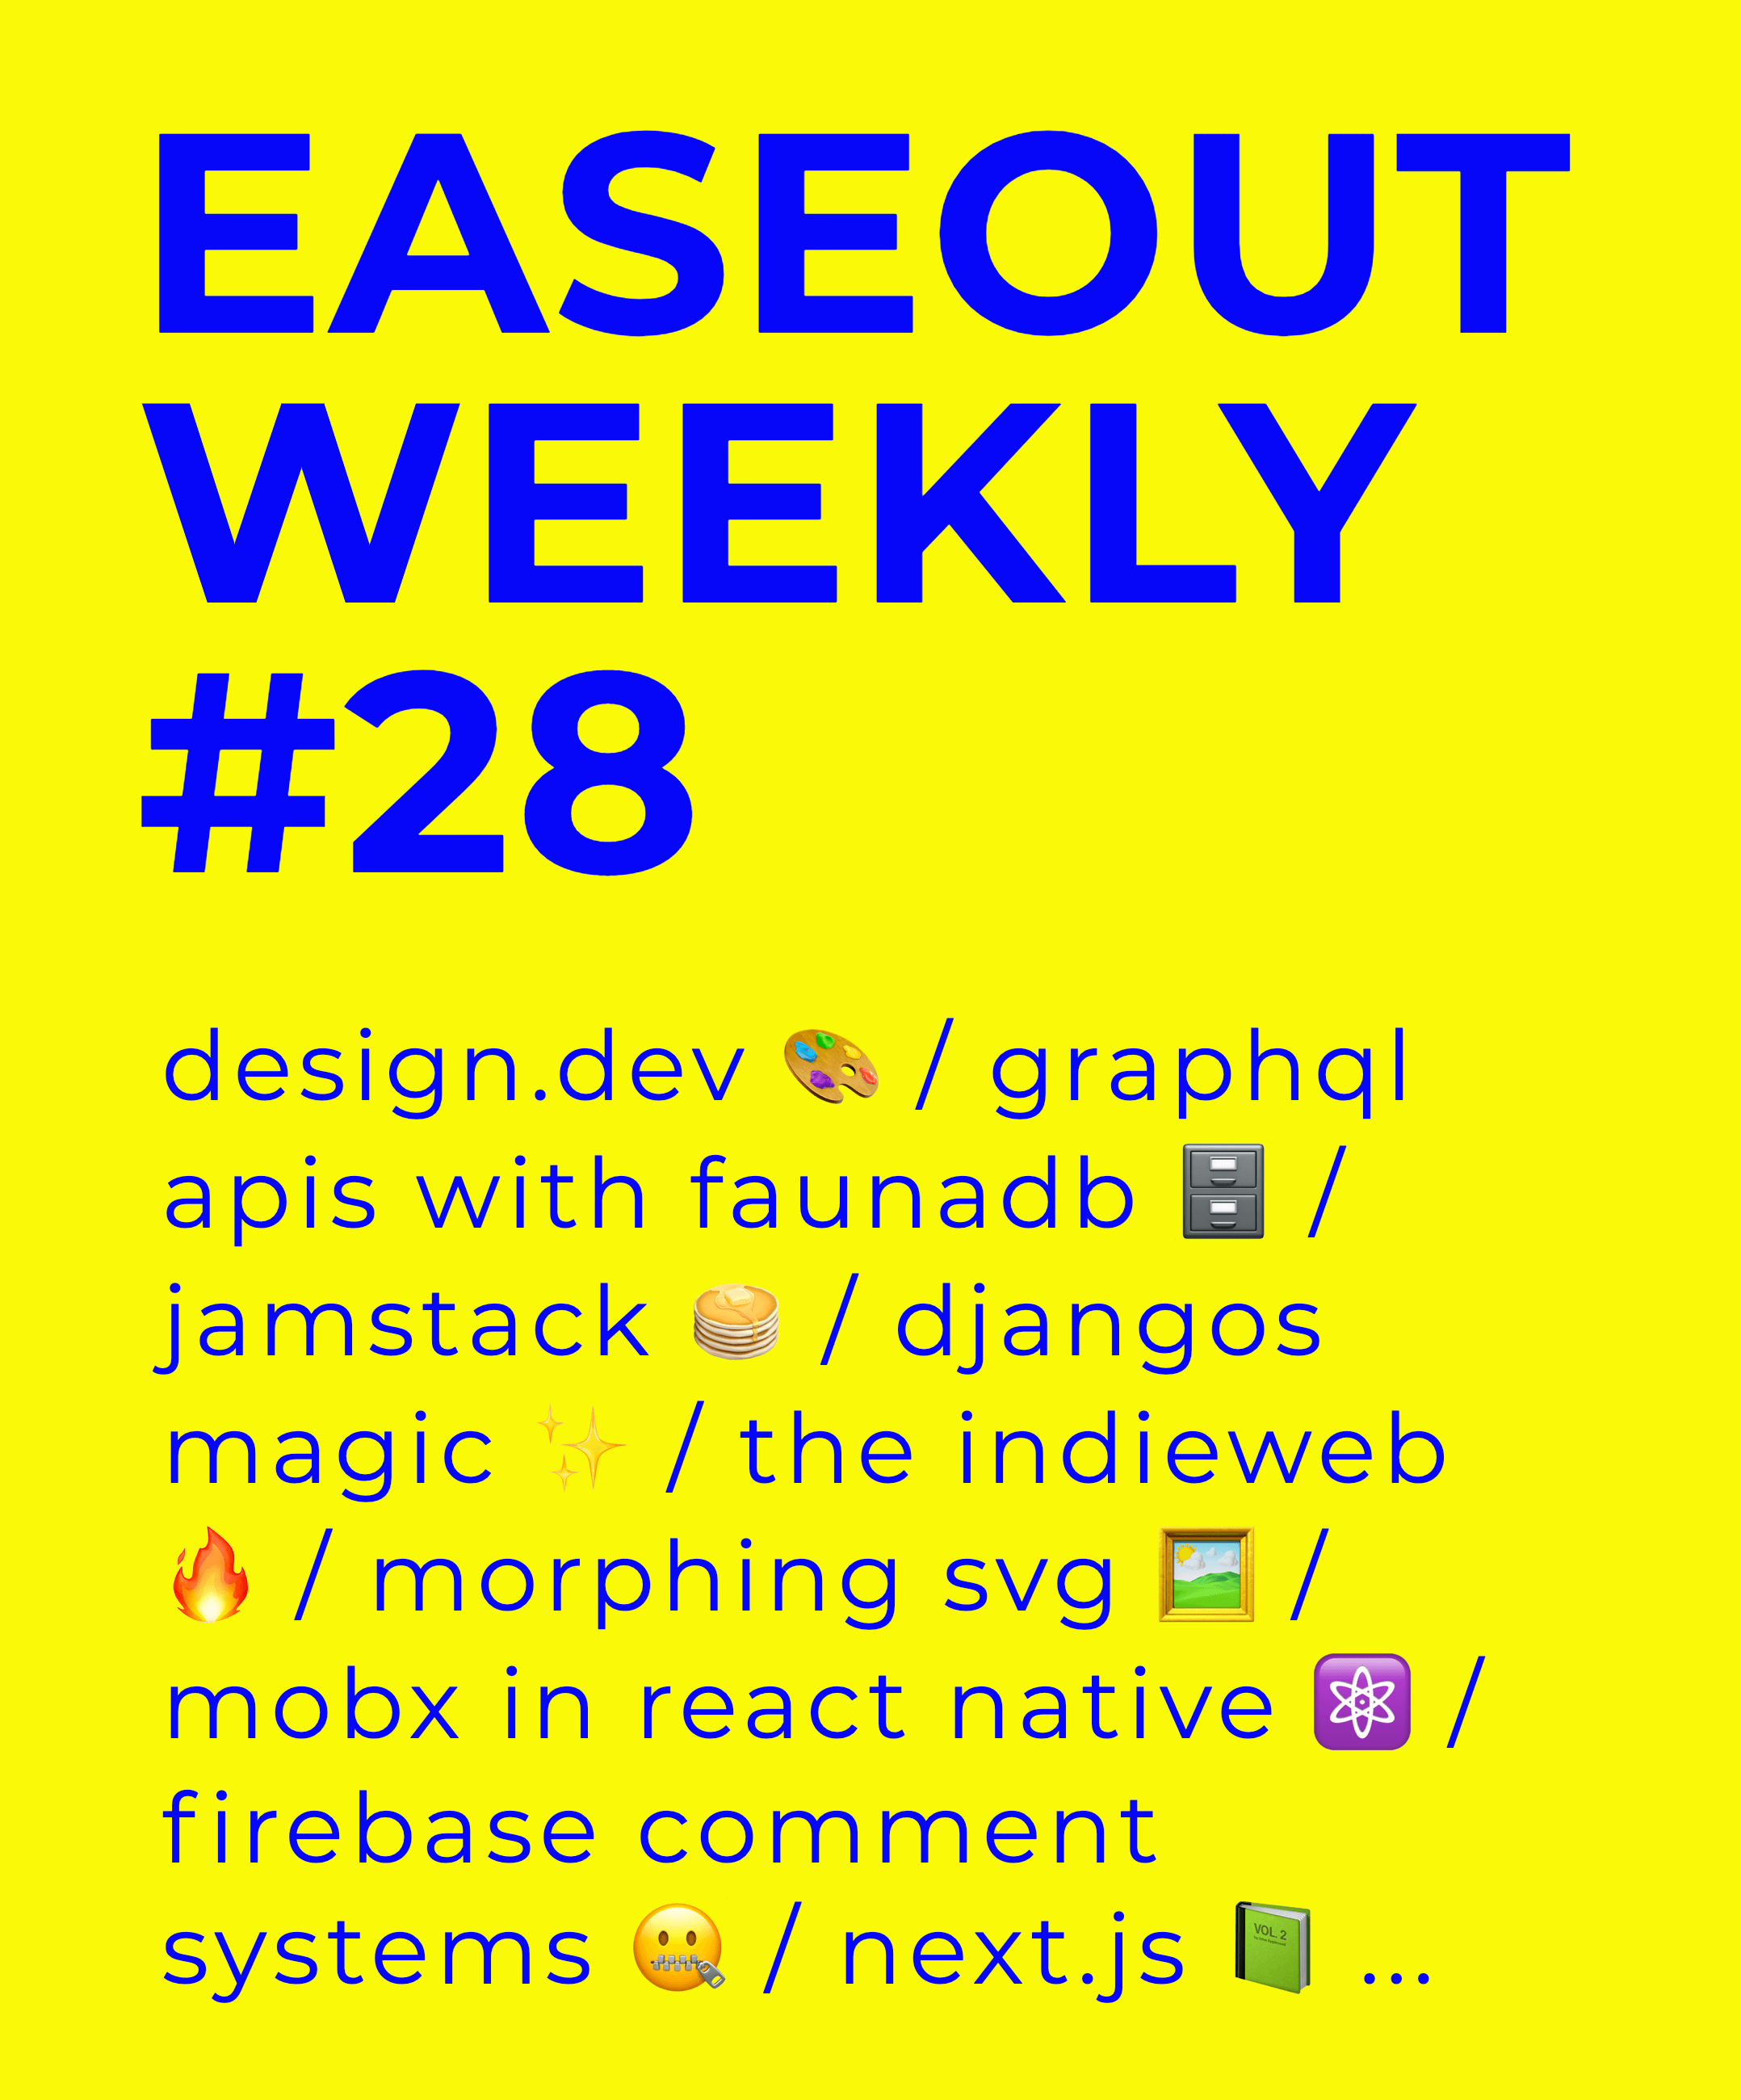 Easeout Weekly #28